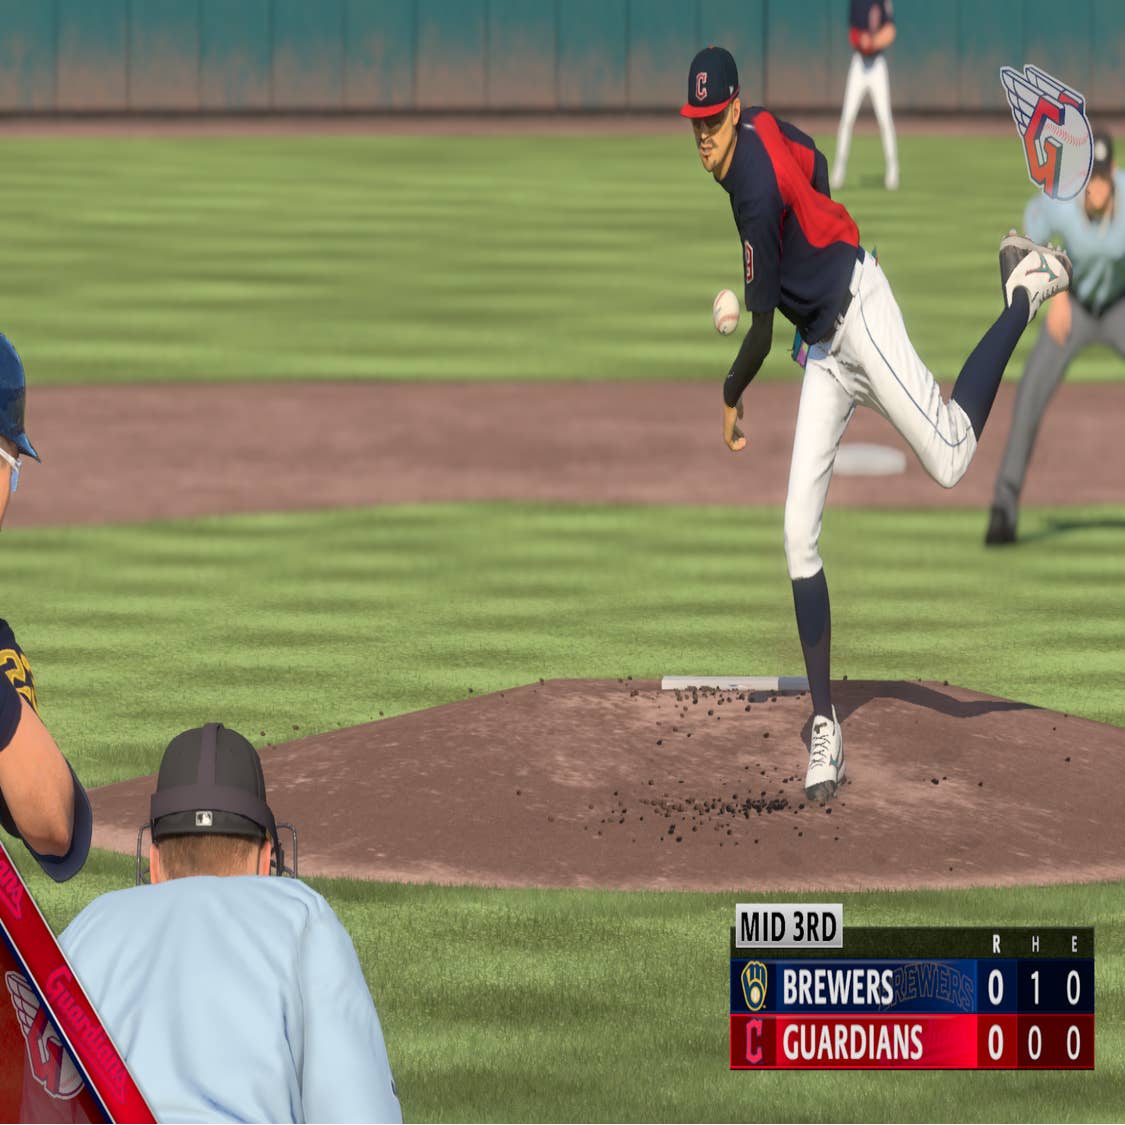 MLB: The Show can make you feel the frustration and isolation of